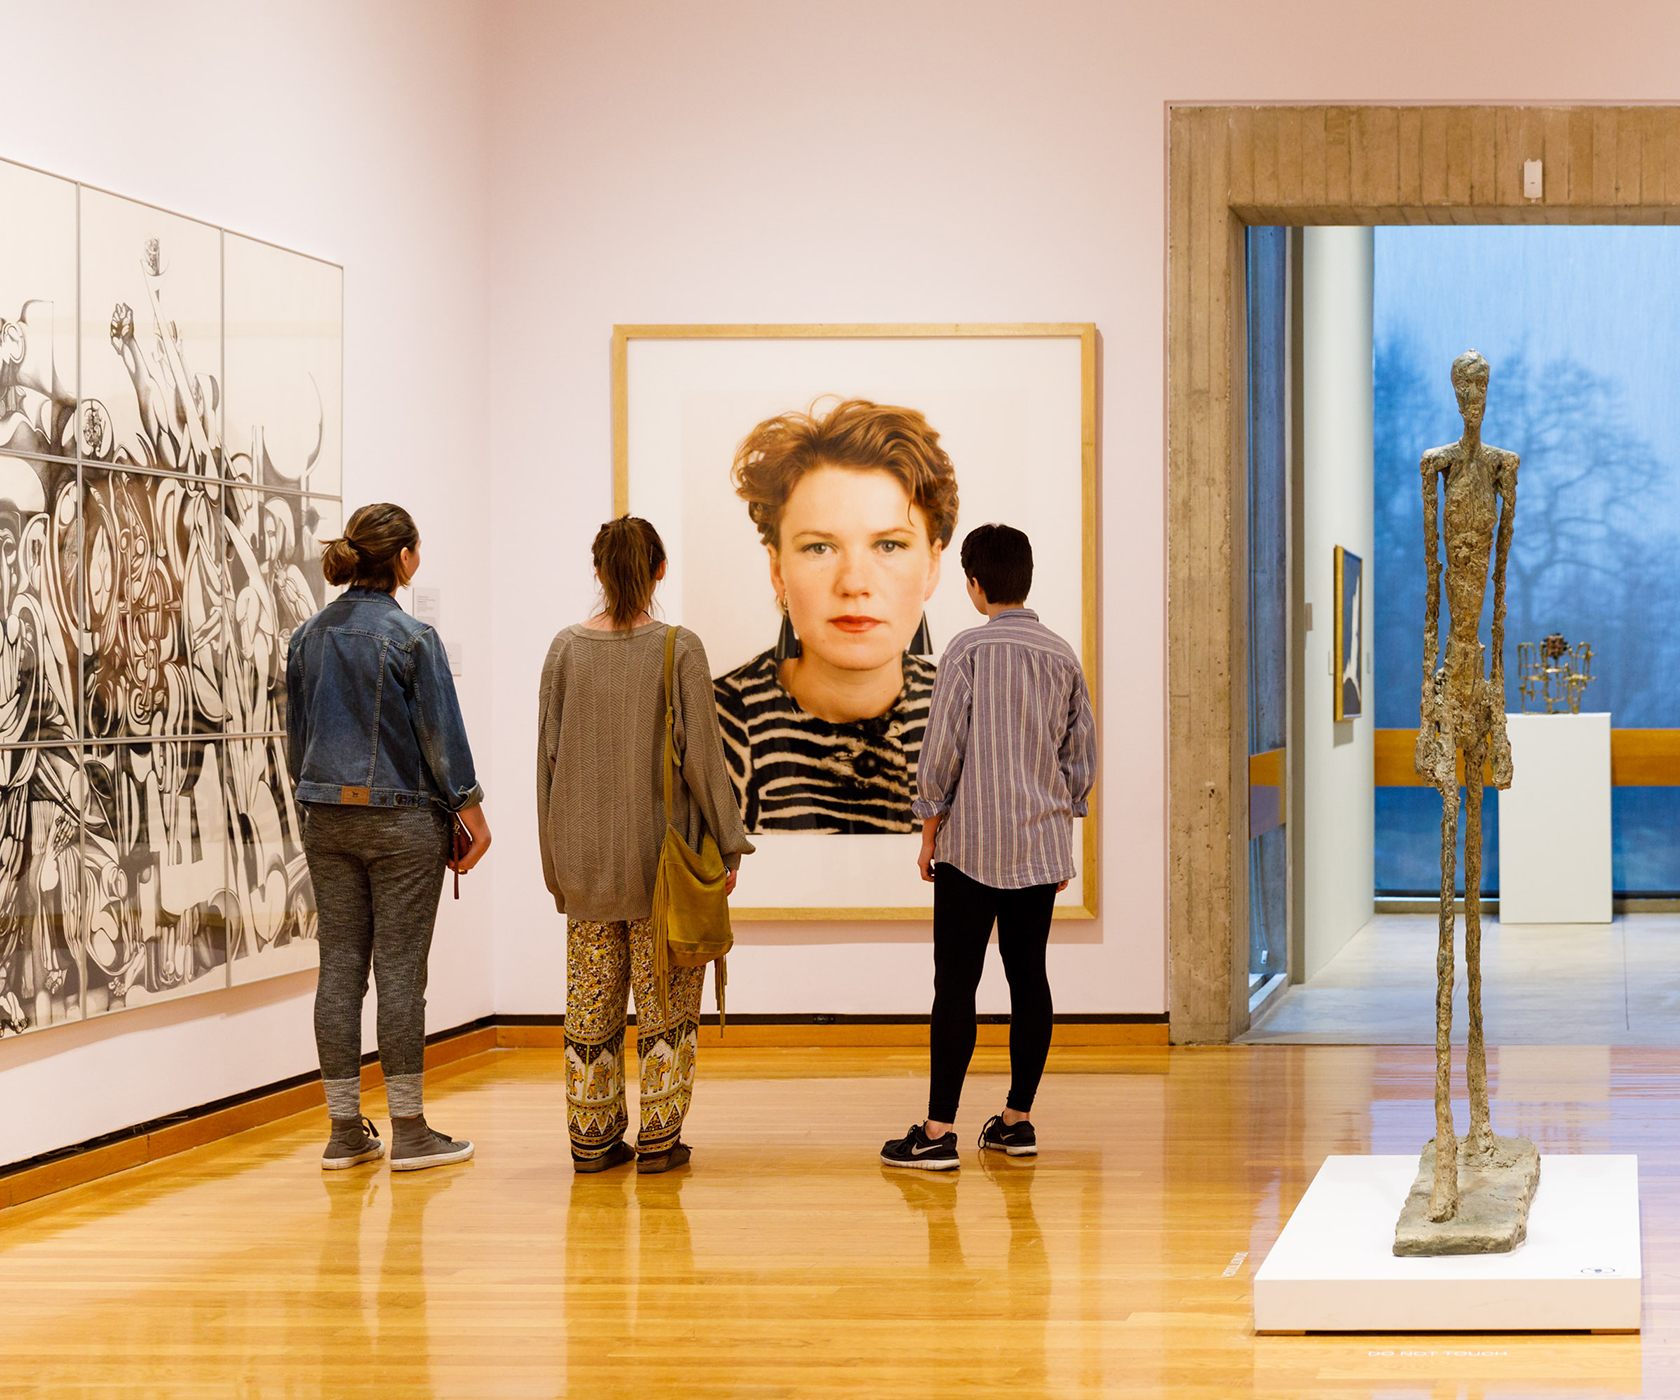 Three people look at a large photographic portrait of a white woman with short hair in a museum gallery with sculpture and other art on the light pink walls